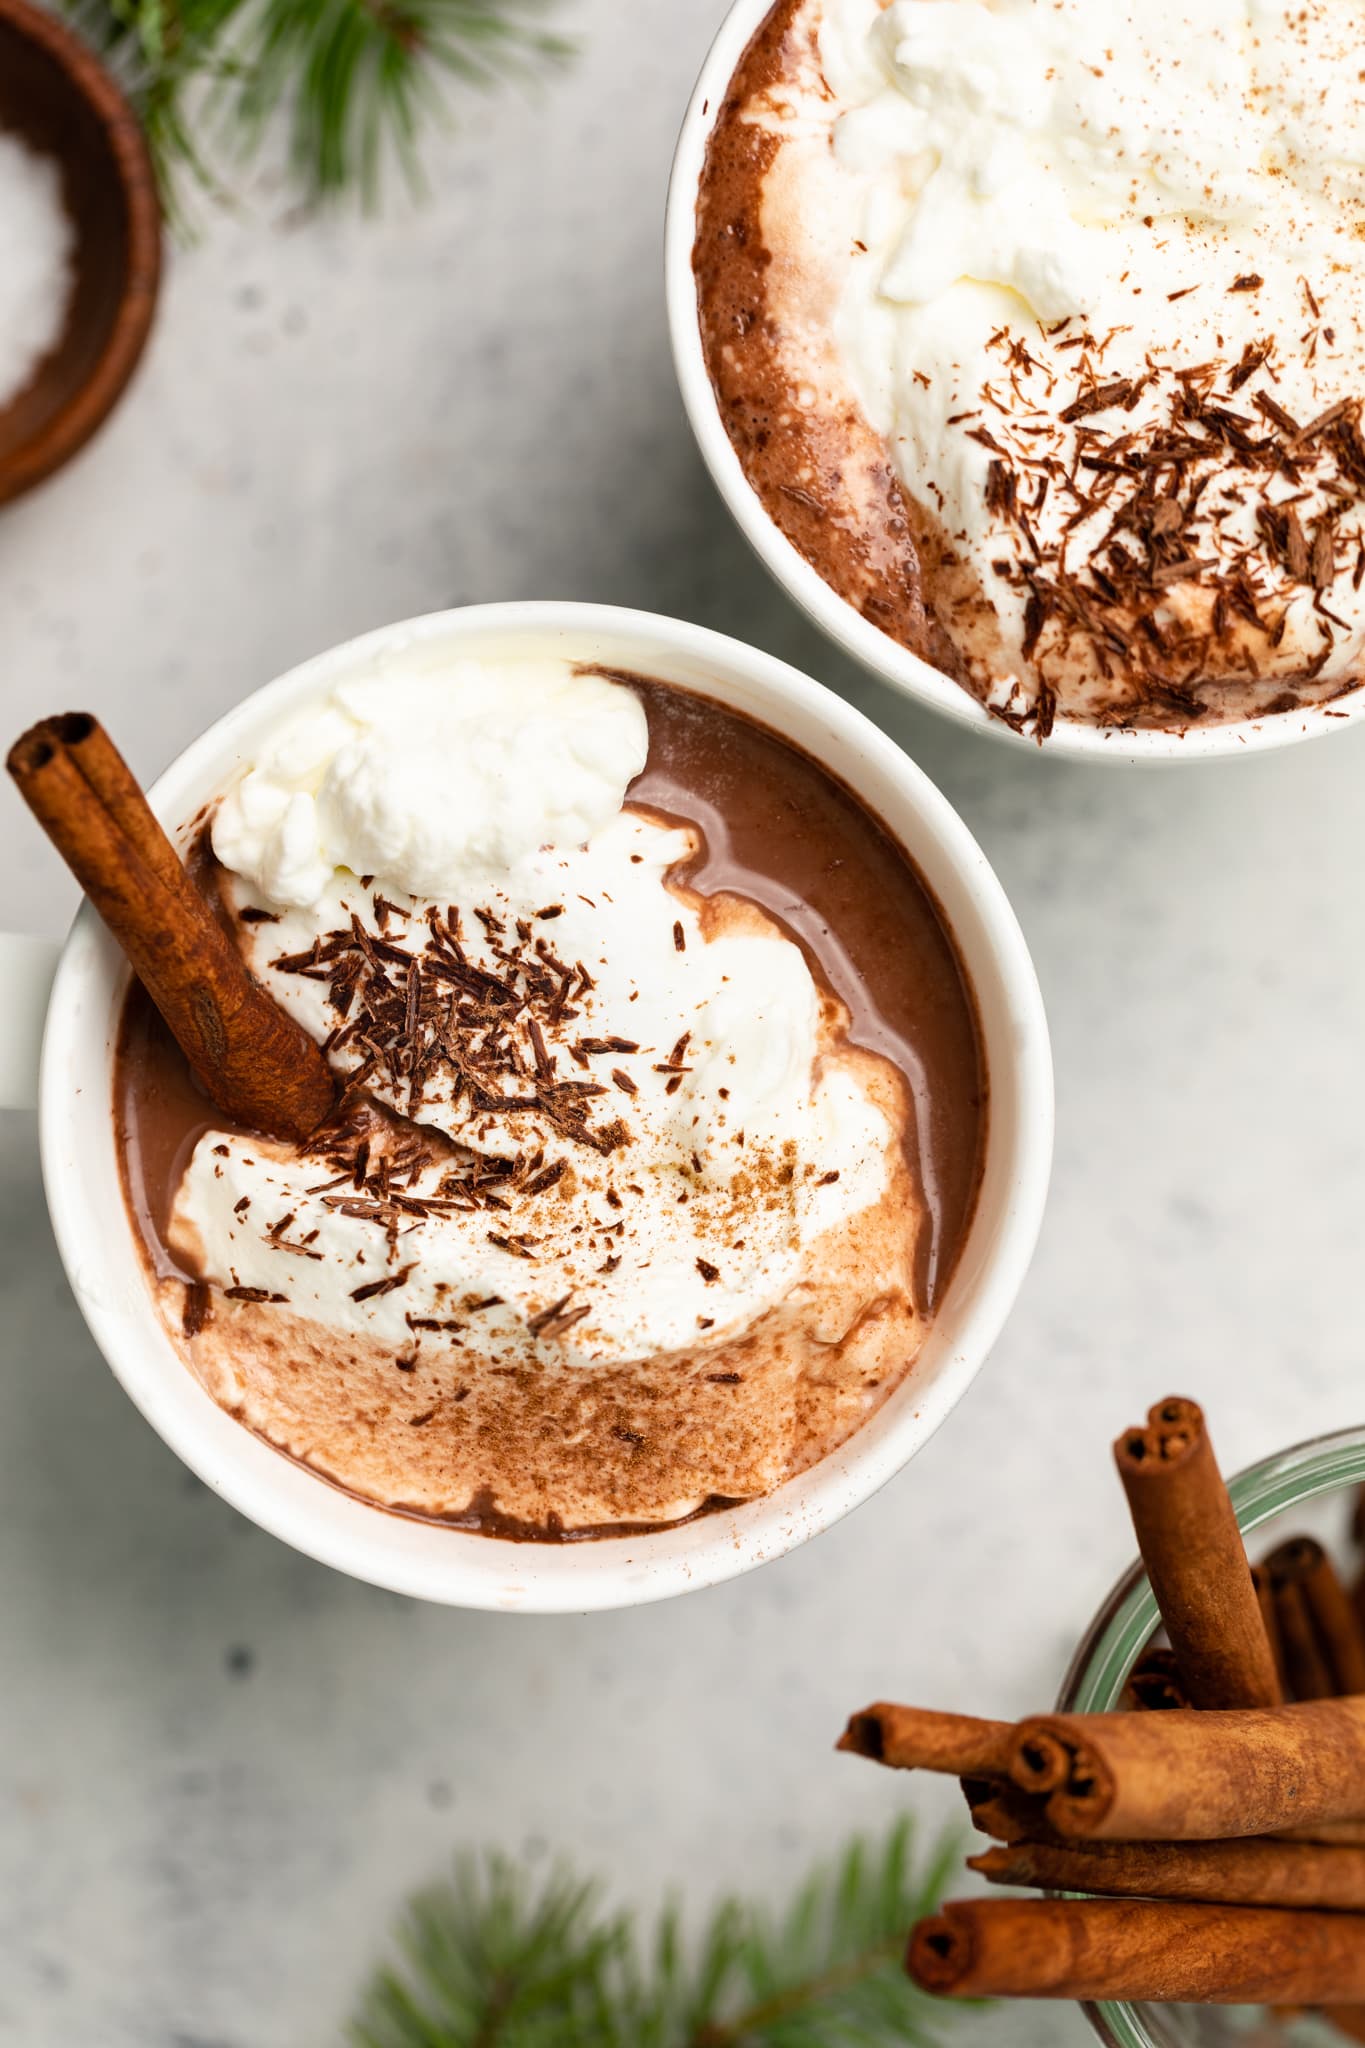 Healthy Hot Chocolate - The Delicious Crescent